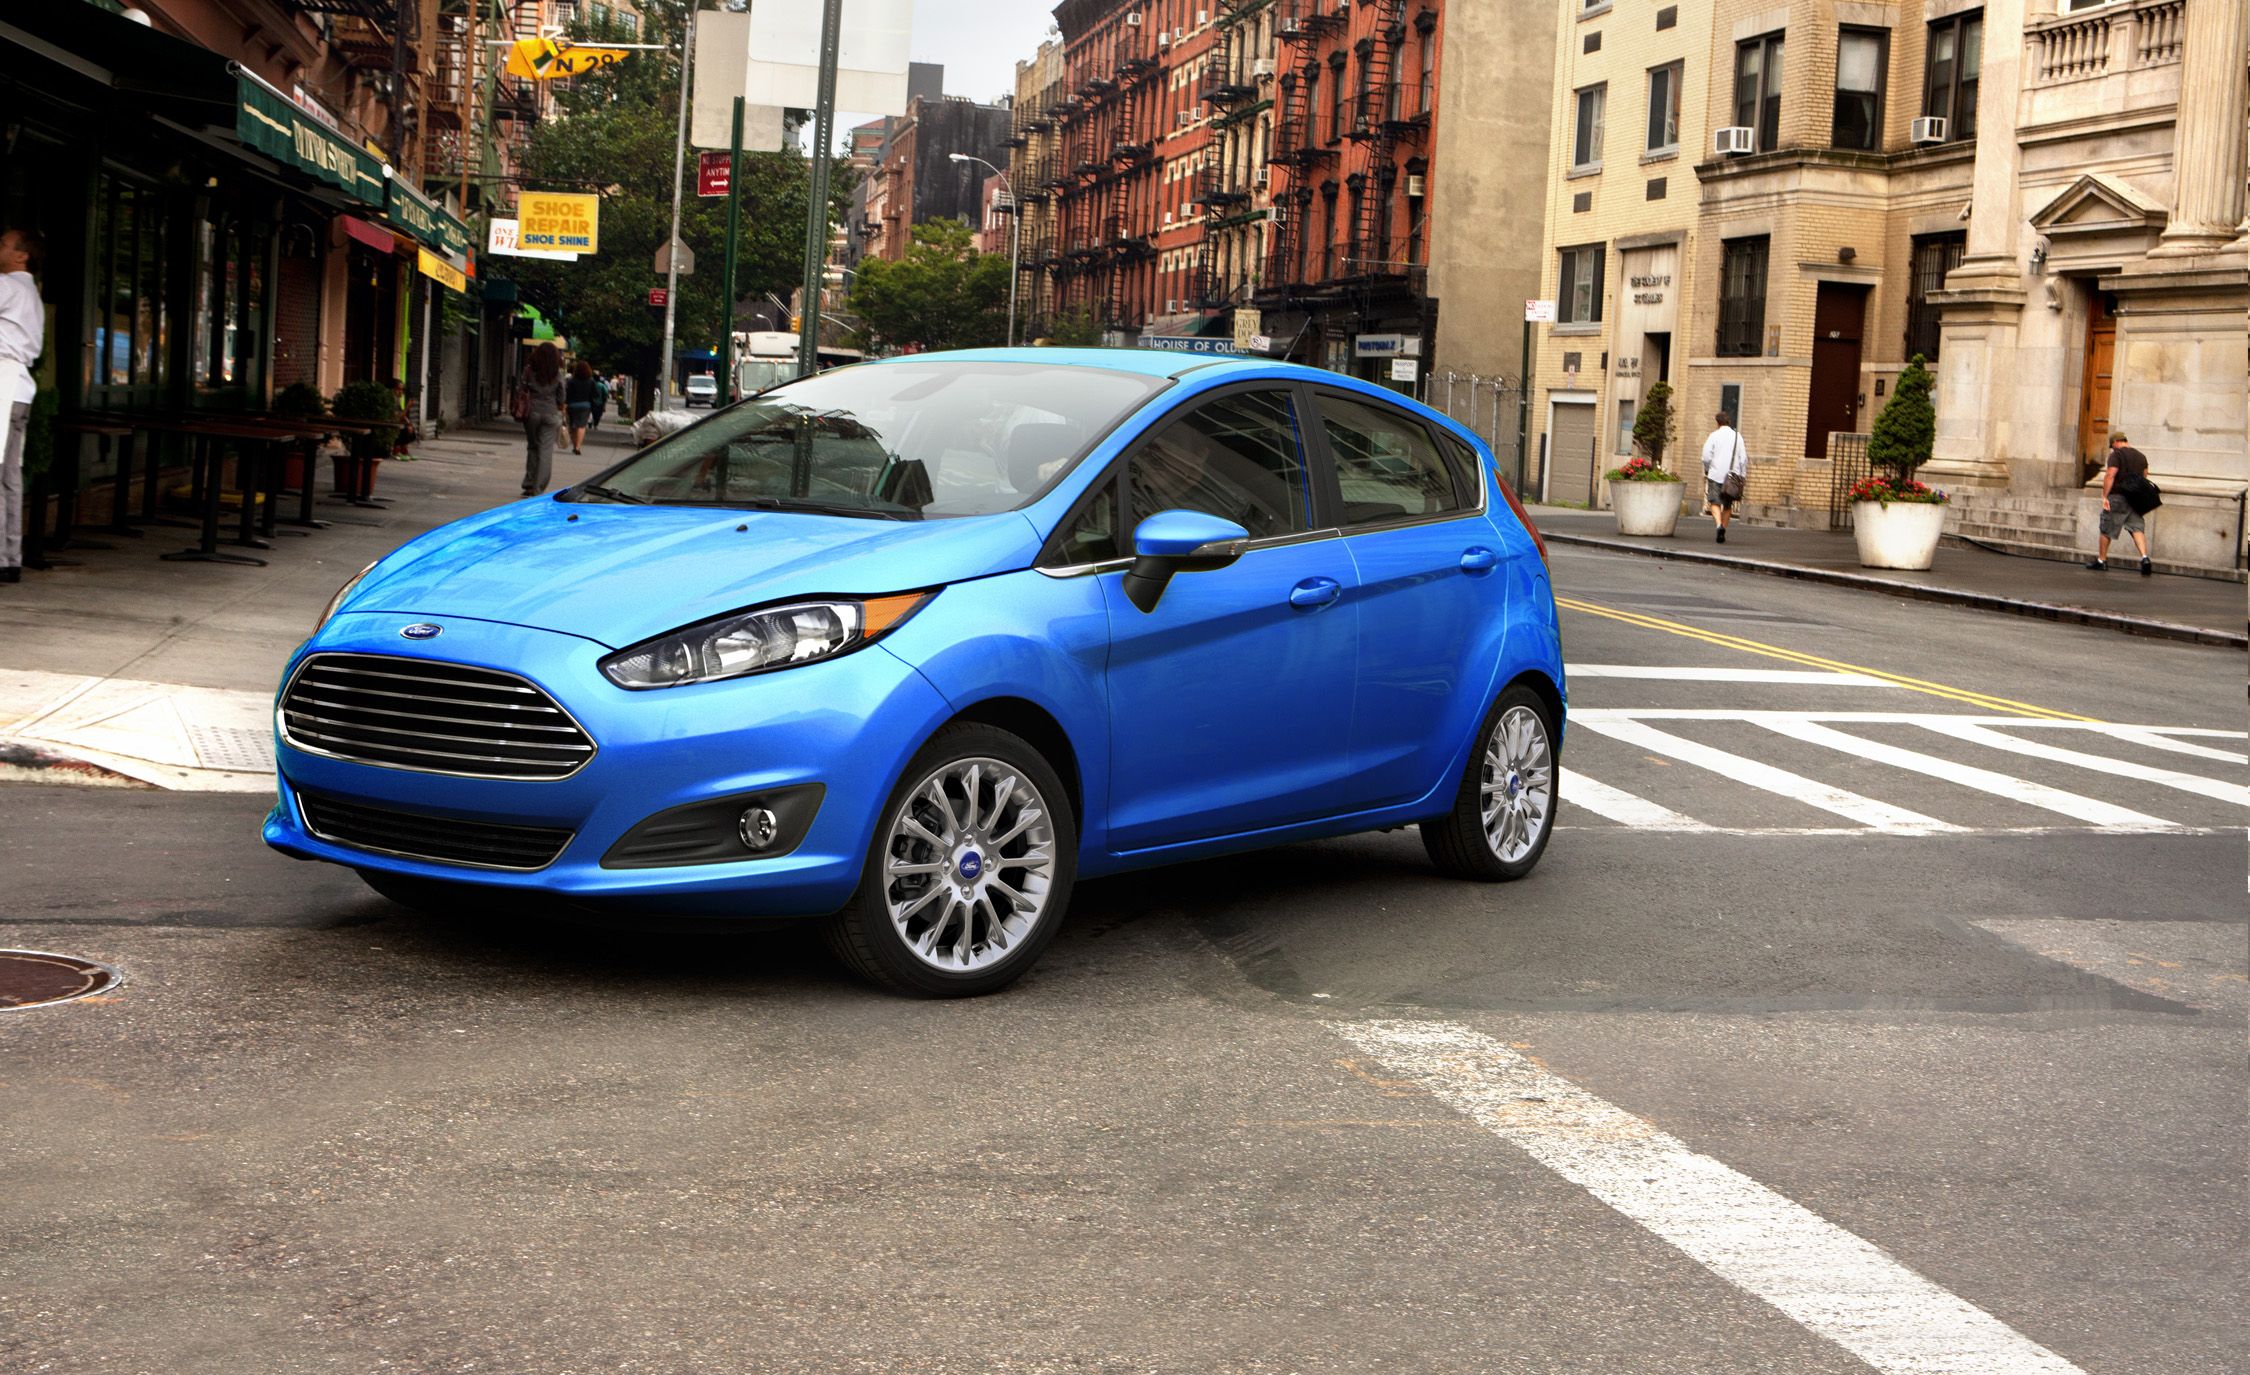 2017 Ford Fiesta Hatchback Automatic Test | Review | Car and